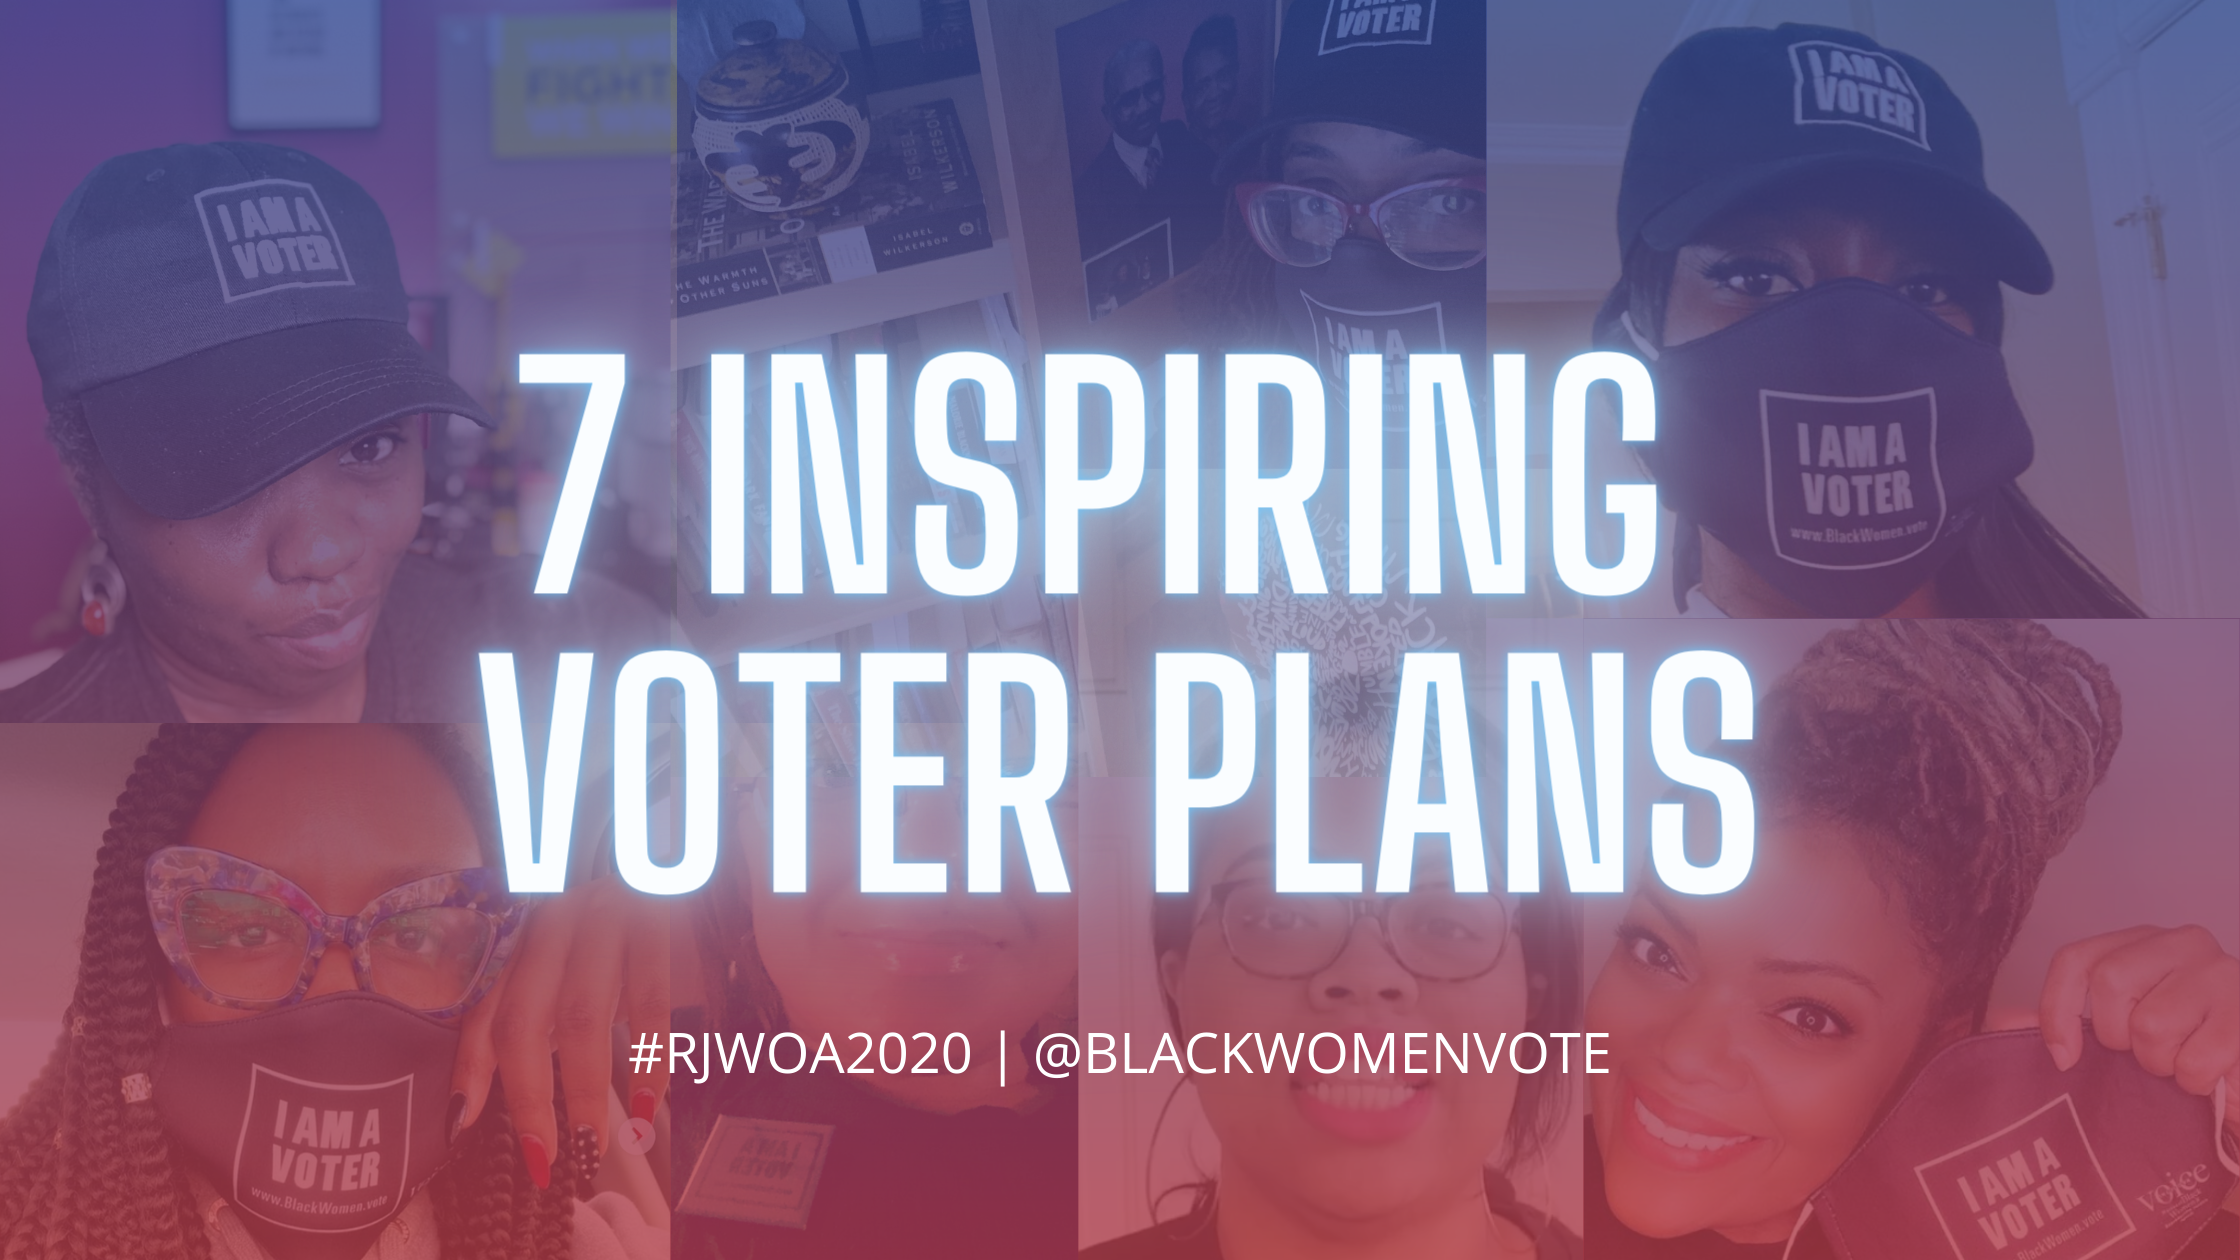 Image of 7 Black women influencers with the text '7 Inspiring Voter Plans' overlaid.